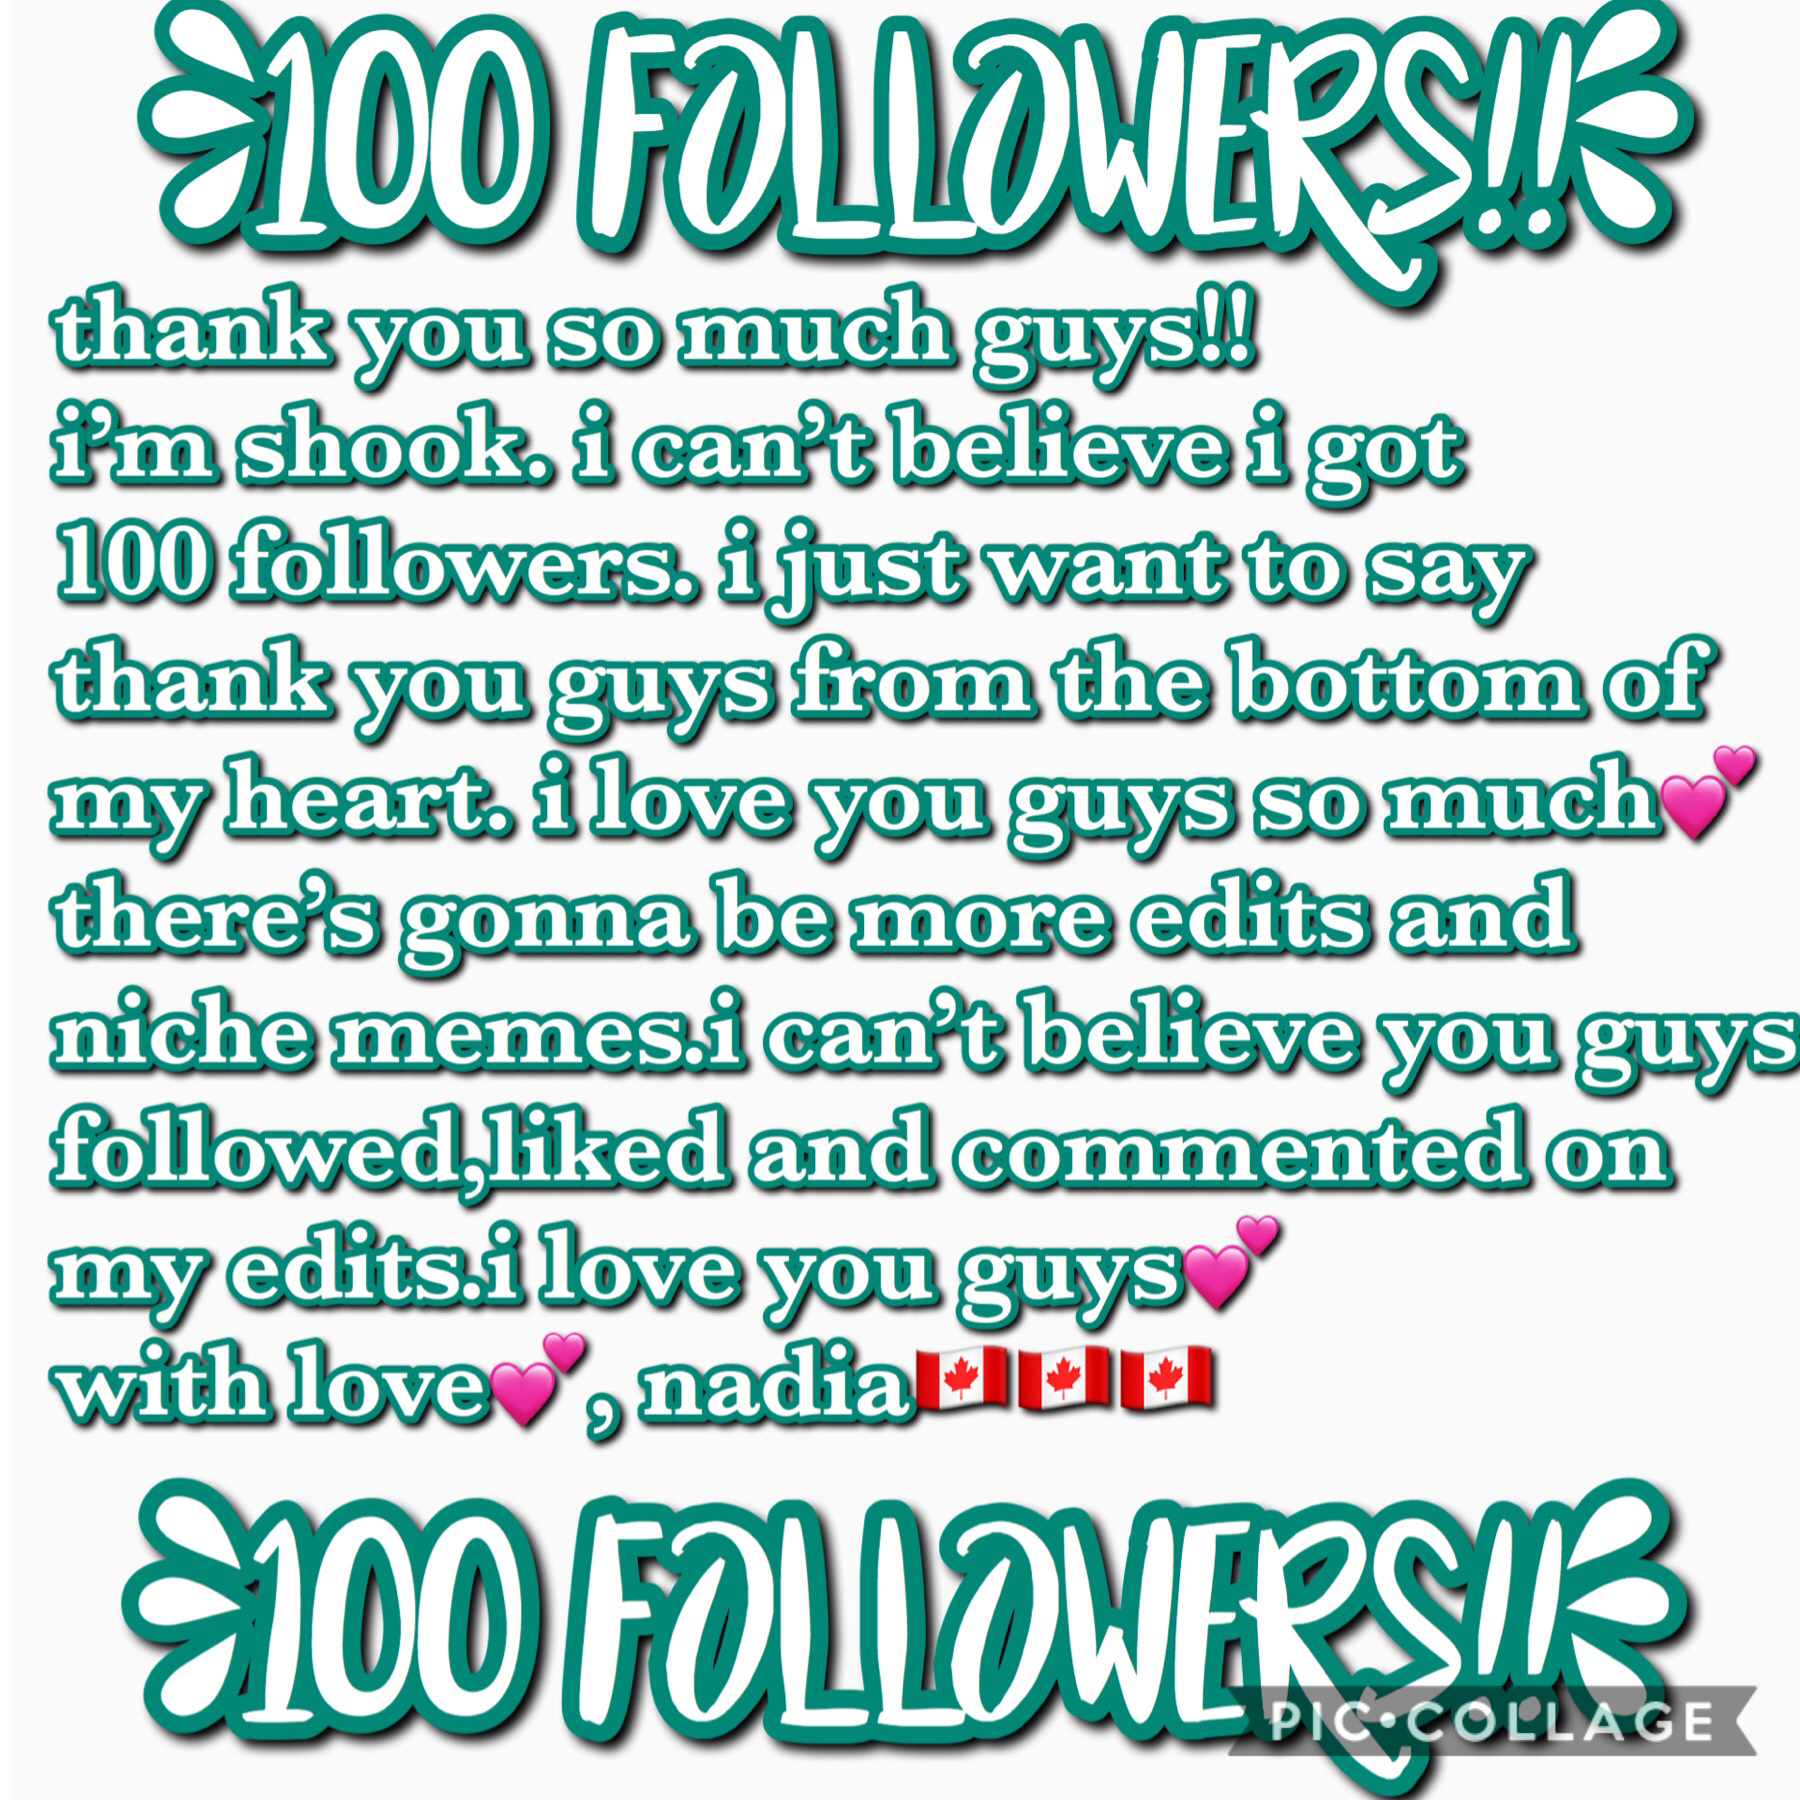 ♡Tap



peachyniche::❃
OMG!!!!!!! I CANT BELIEVE I GOT 100 FOLLOWERS!! I JUST WANT TO THANK YOU GUYS AND THE FRIENDS THAT I HAVE MADE ON PC💕💕I LUV YALL SO MUCH😘😘😘😘

—date:7/8/18
—time:7:05
—qotd:i love you guys so much💕💕
::❃
